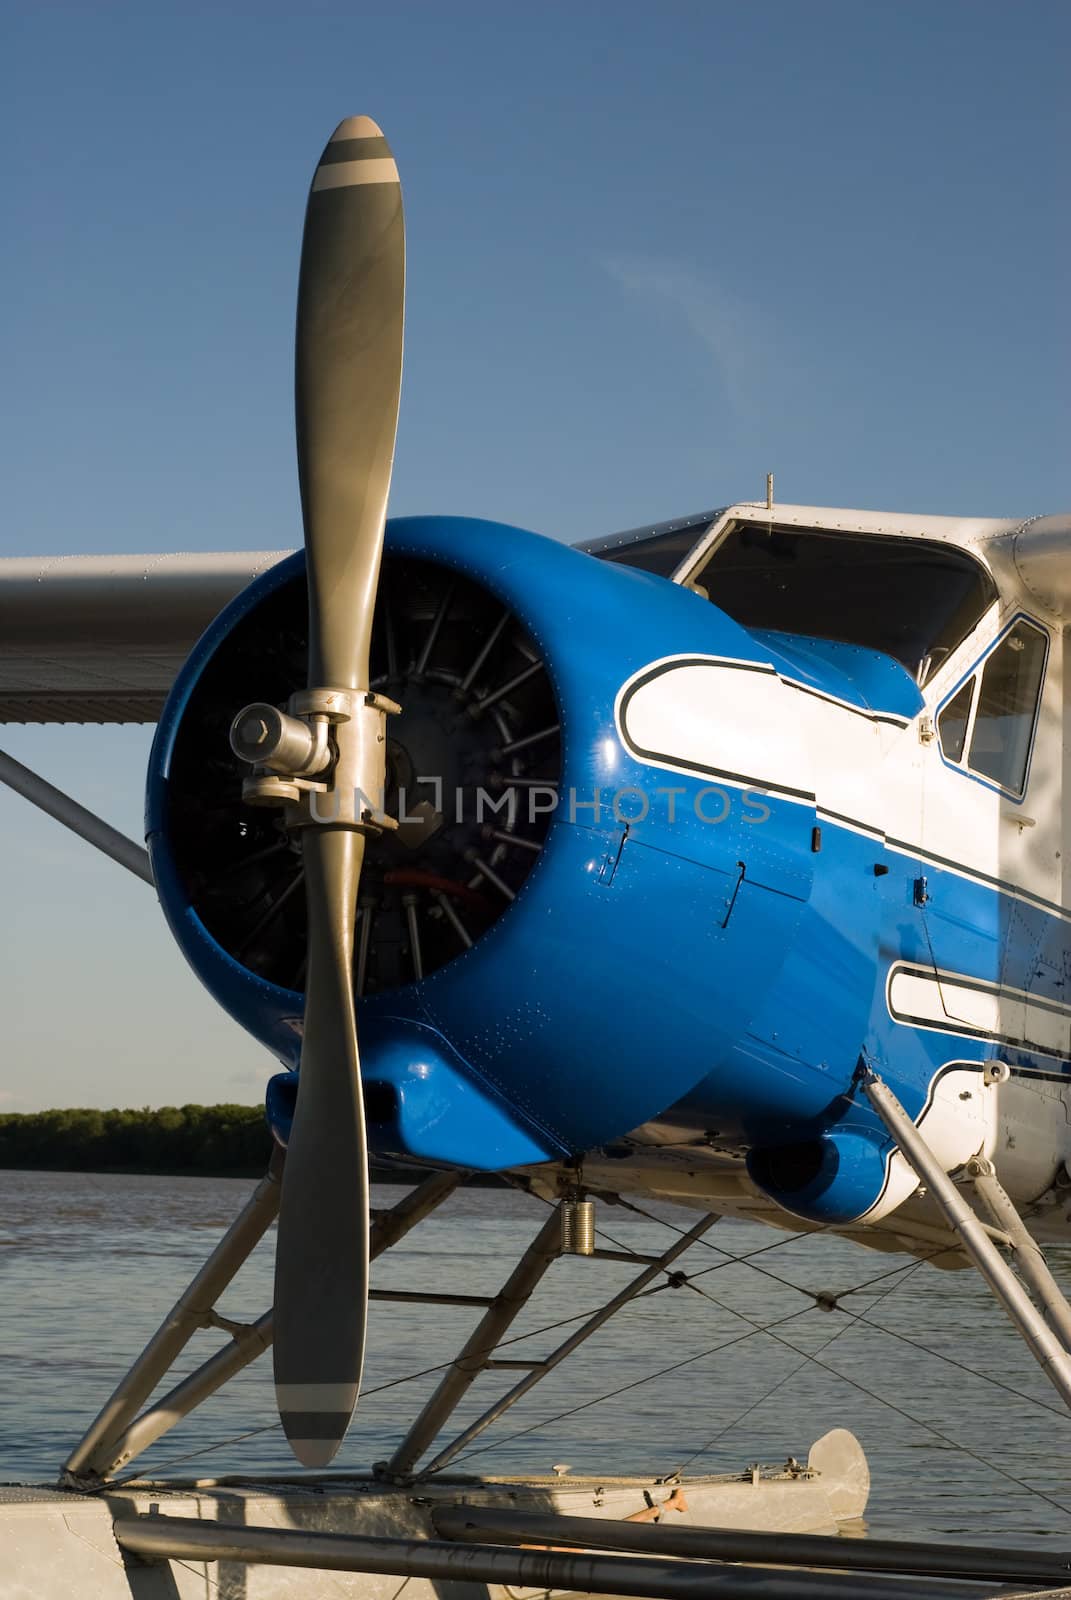 A small blue and white plane with a single propeller